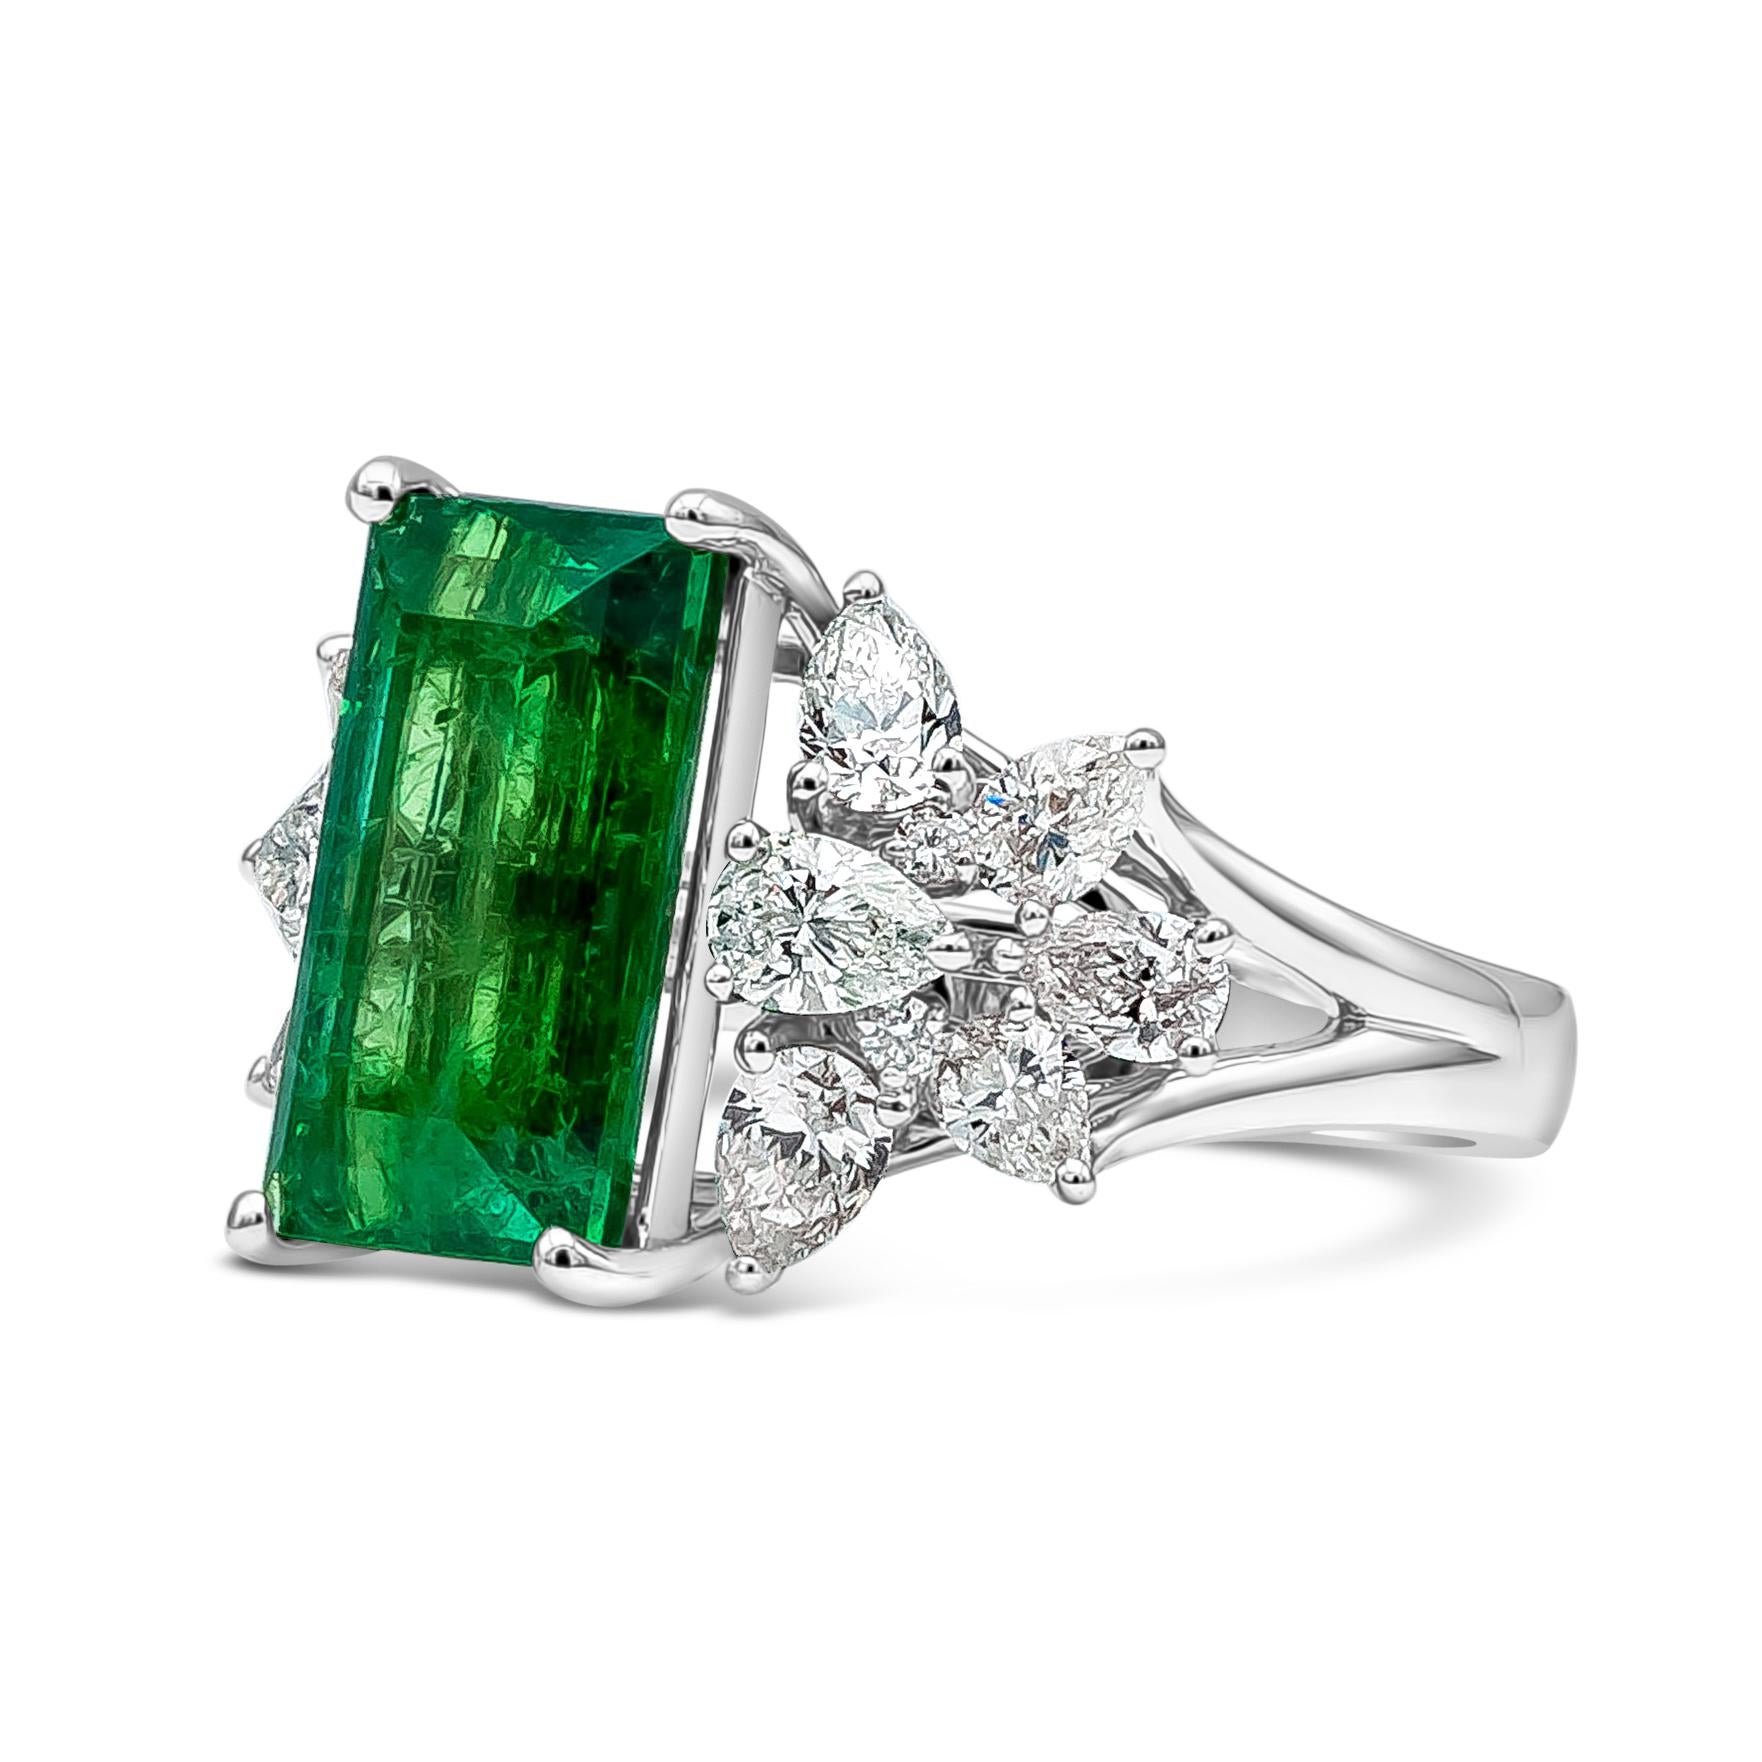 Well crafted high end jewelry fashion ring featuring GRS certified 5.40 carat baguette cut green emerald gemstone. 12 pear shape diamonds weighing 1.99 carat total and 4 bright round diamonds weighing 0.05 carat total accents the center gemstone